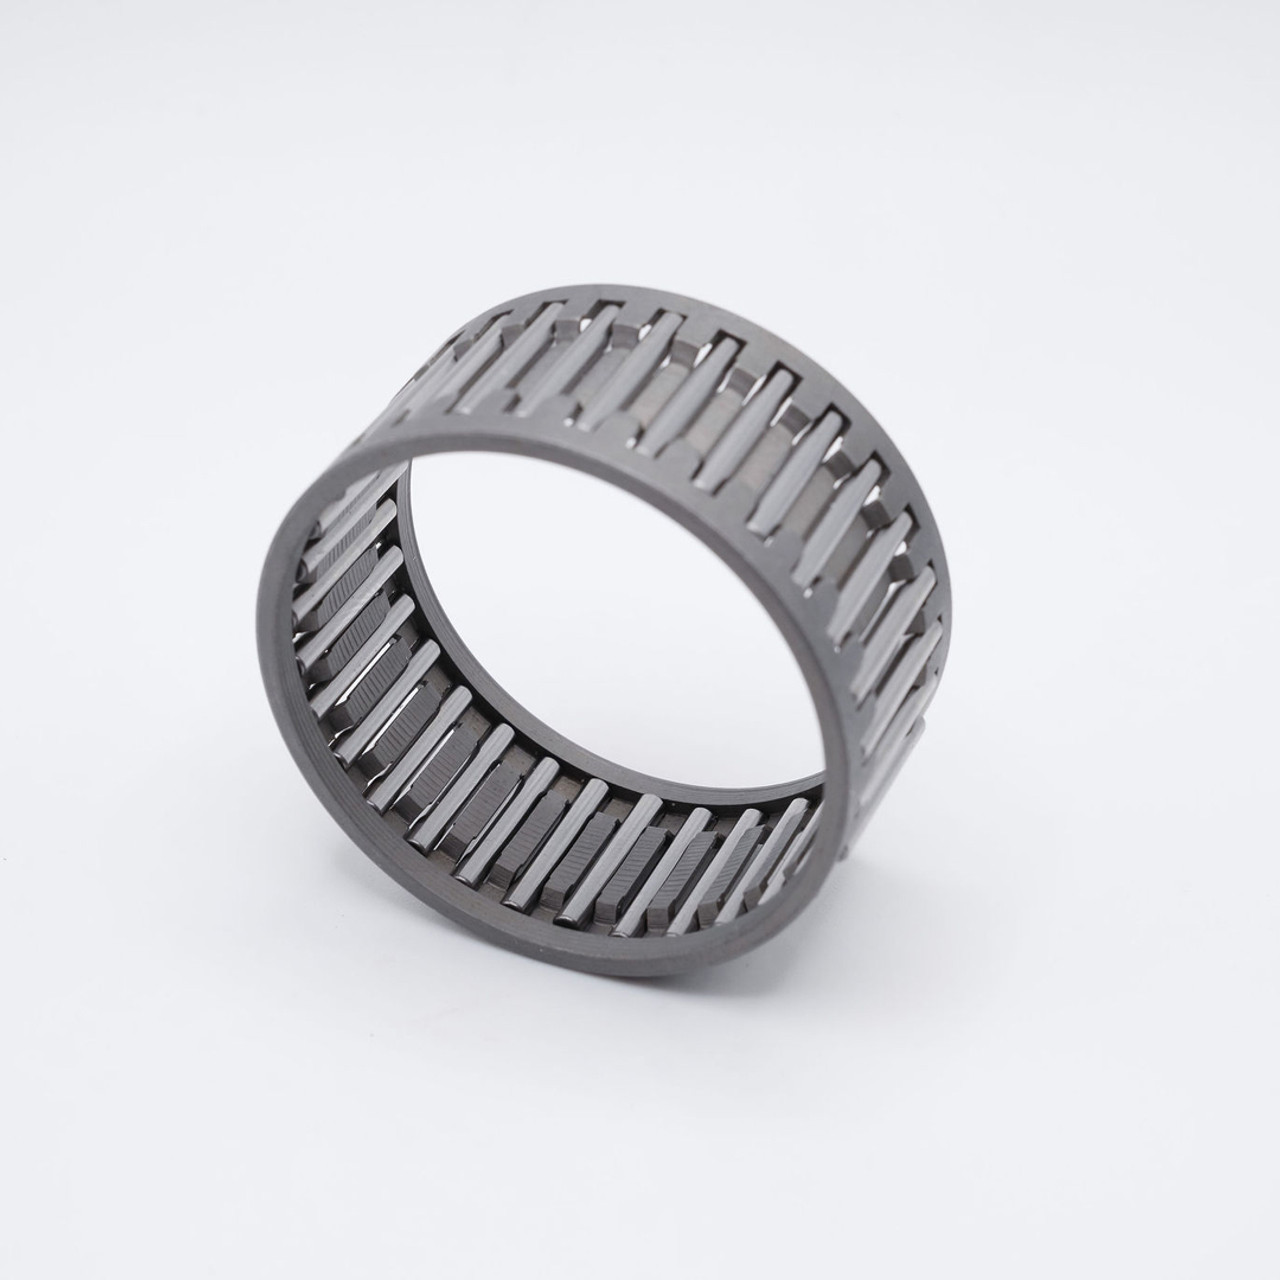 KT202620 Needle Roller Bearing 20x26x20mm Angled View